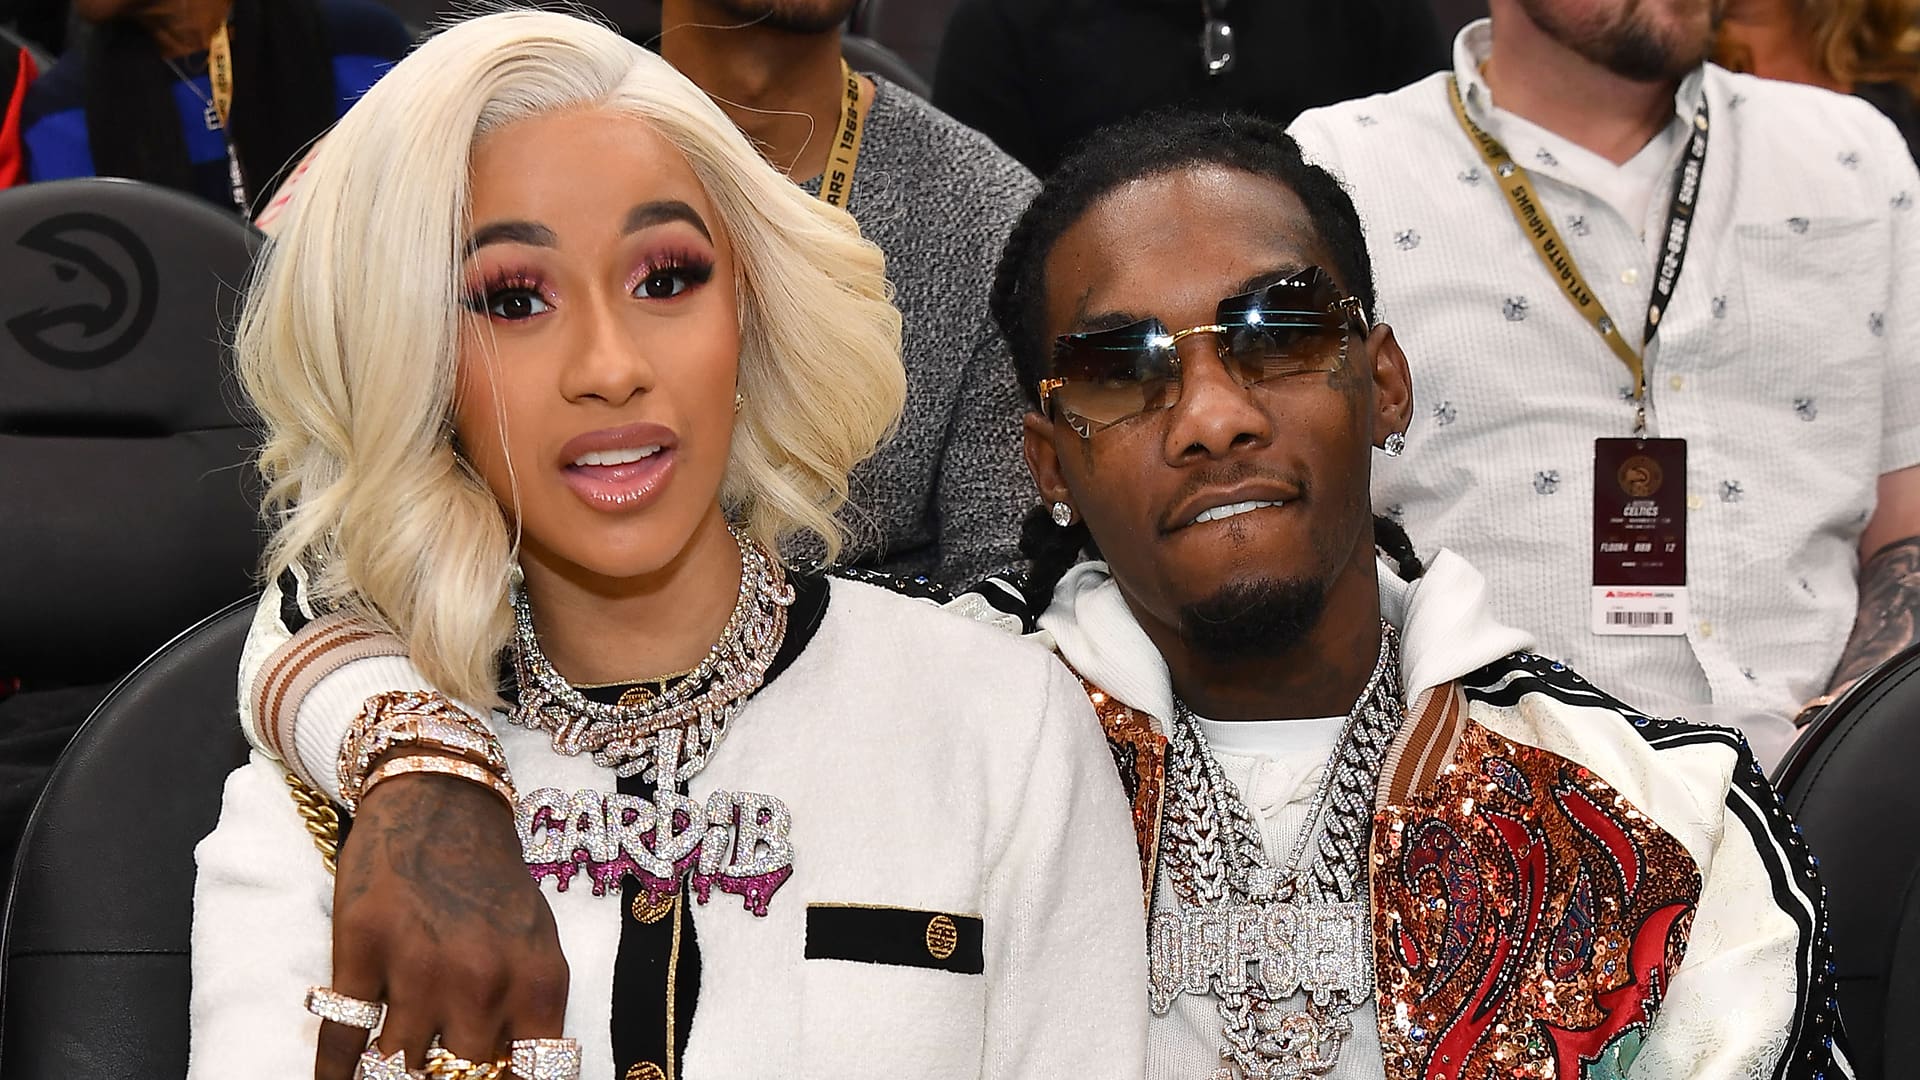 Cardi B And Offset Spending Time Together But She’s Yet To Officially